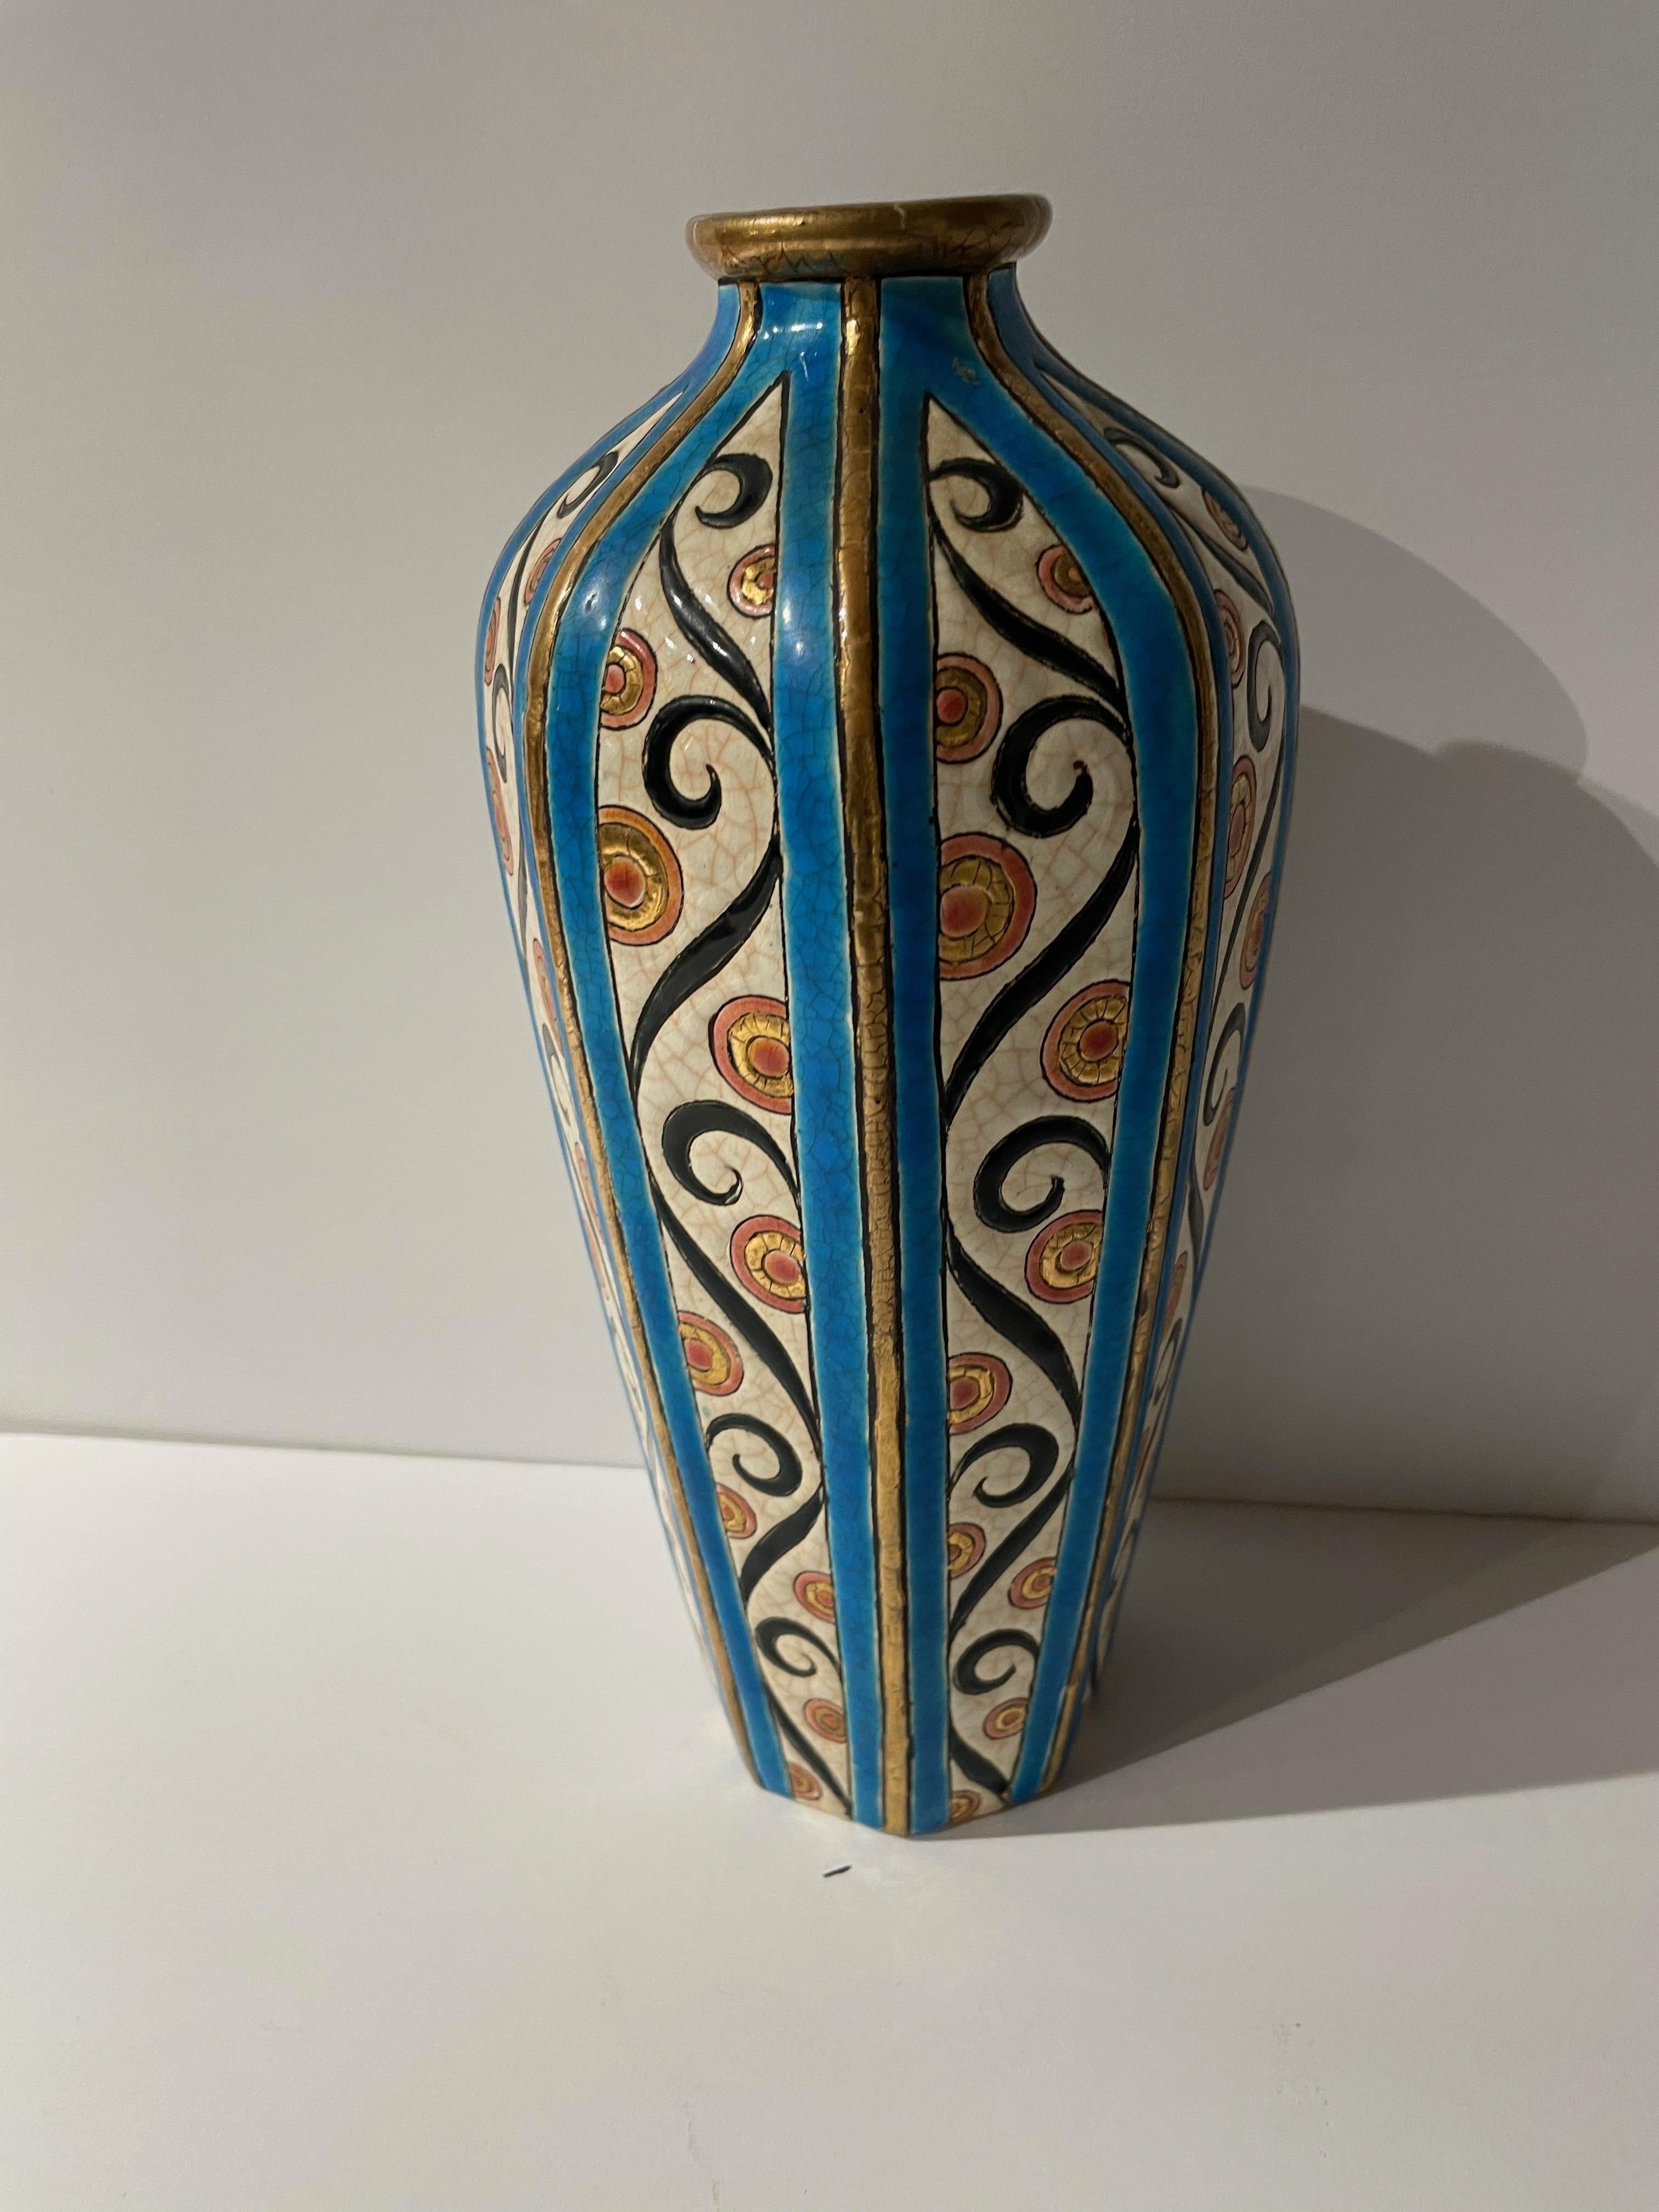 An Art Deco vase from the Longwy Earthworks of France. This piece's delightful scroll design gives it a touch of Art Nouveau influence. Done in the Ceramic Cloisonné technique for which Longwy is famous, it dates from the early 1920s.

Longwy is